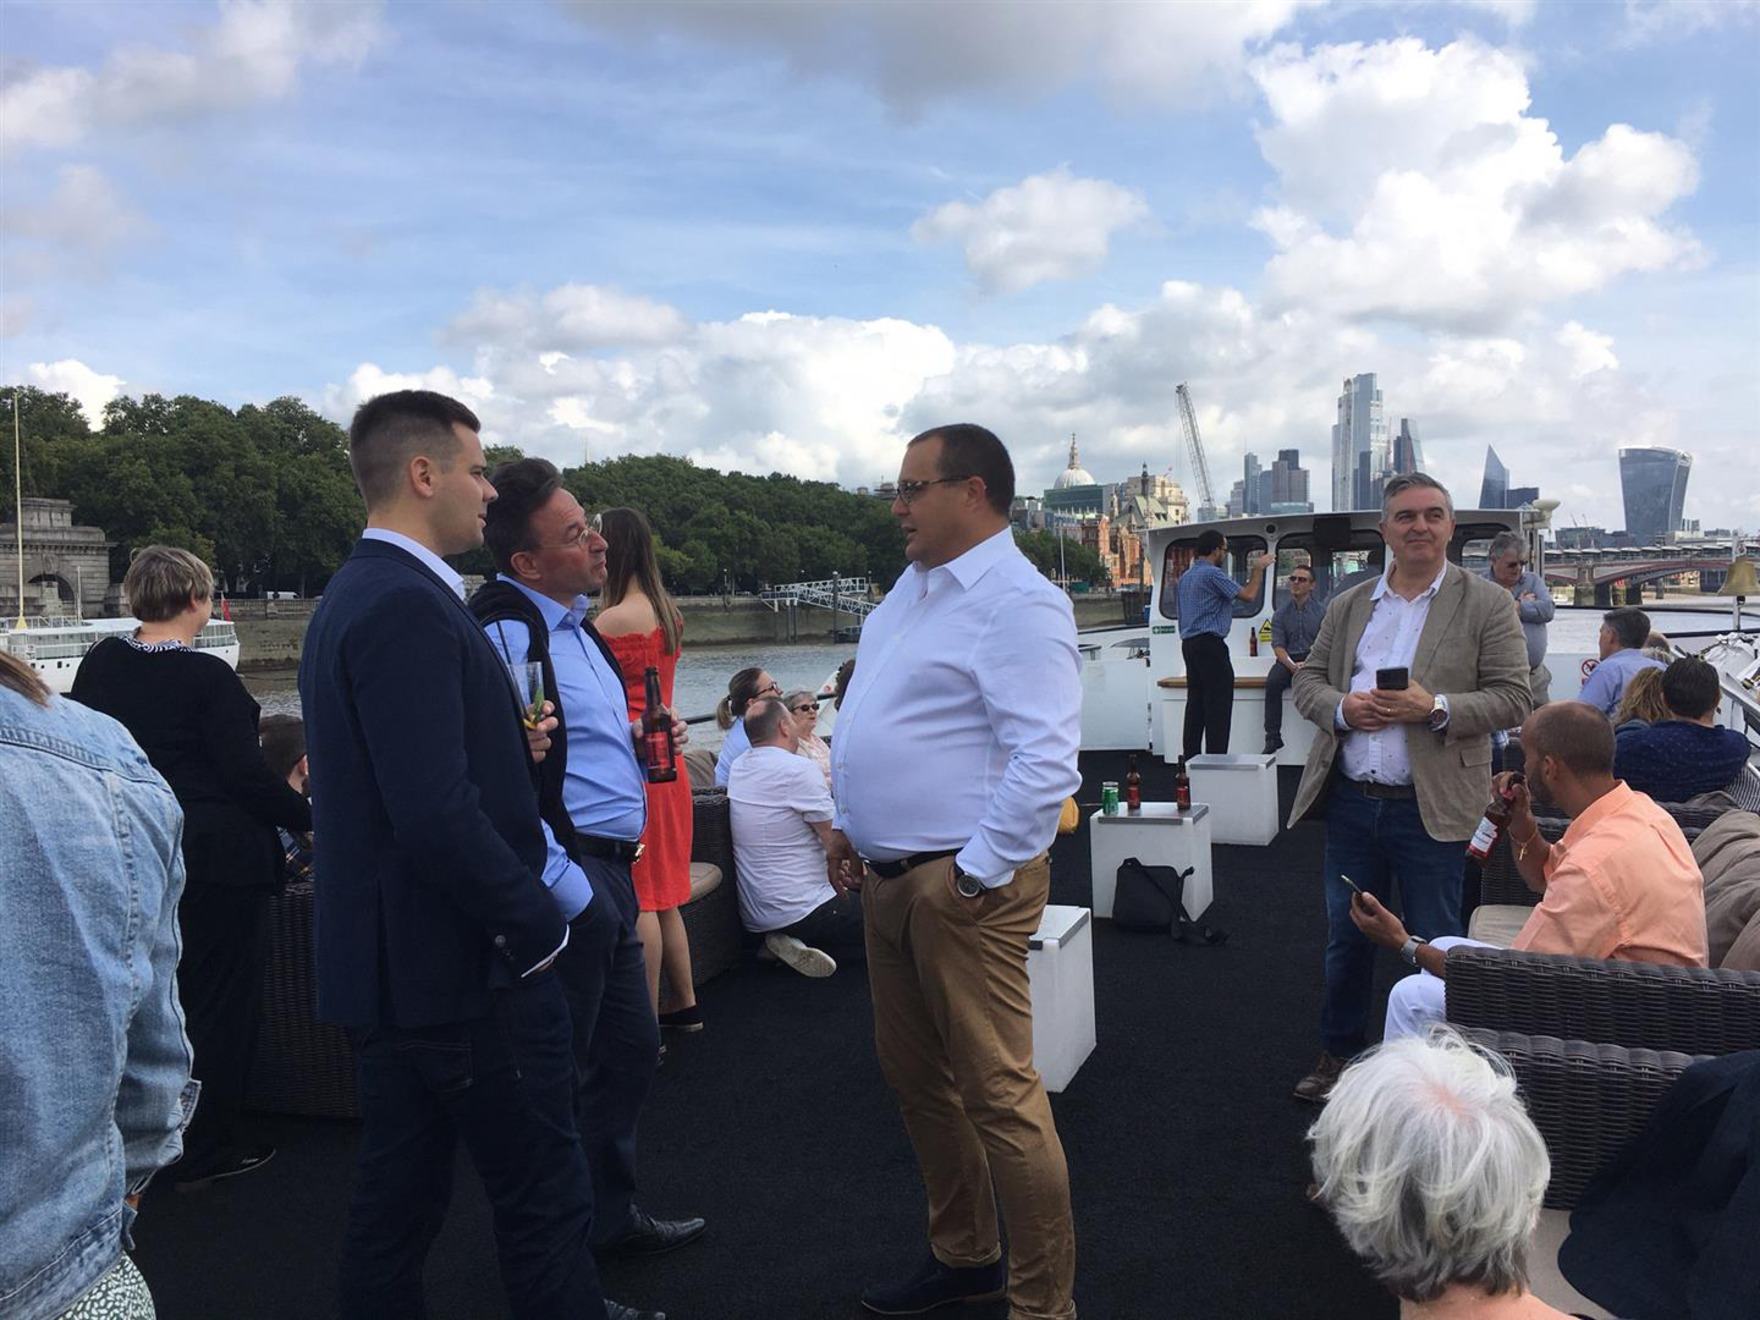 Anglo Foreign Lodges Association (AFLA) - Thames Cruise with Lunch